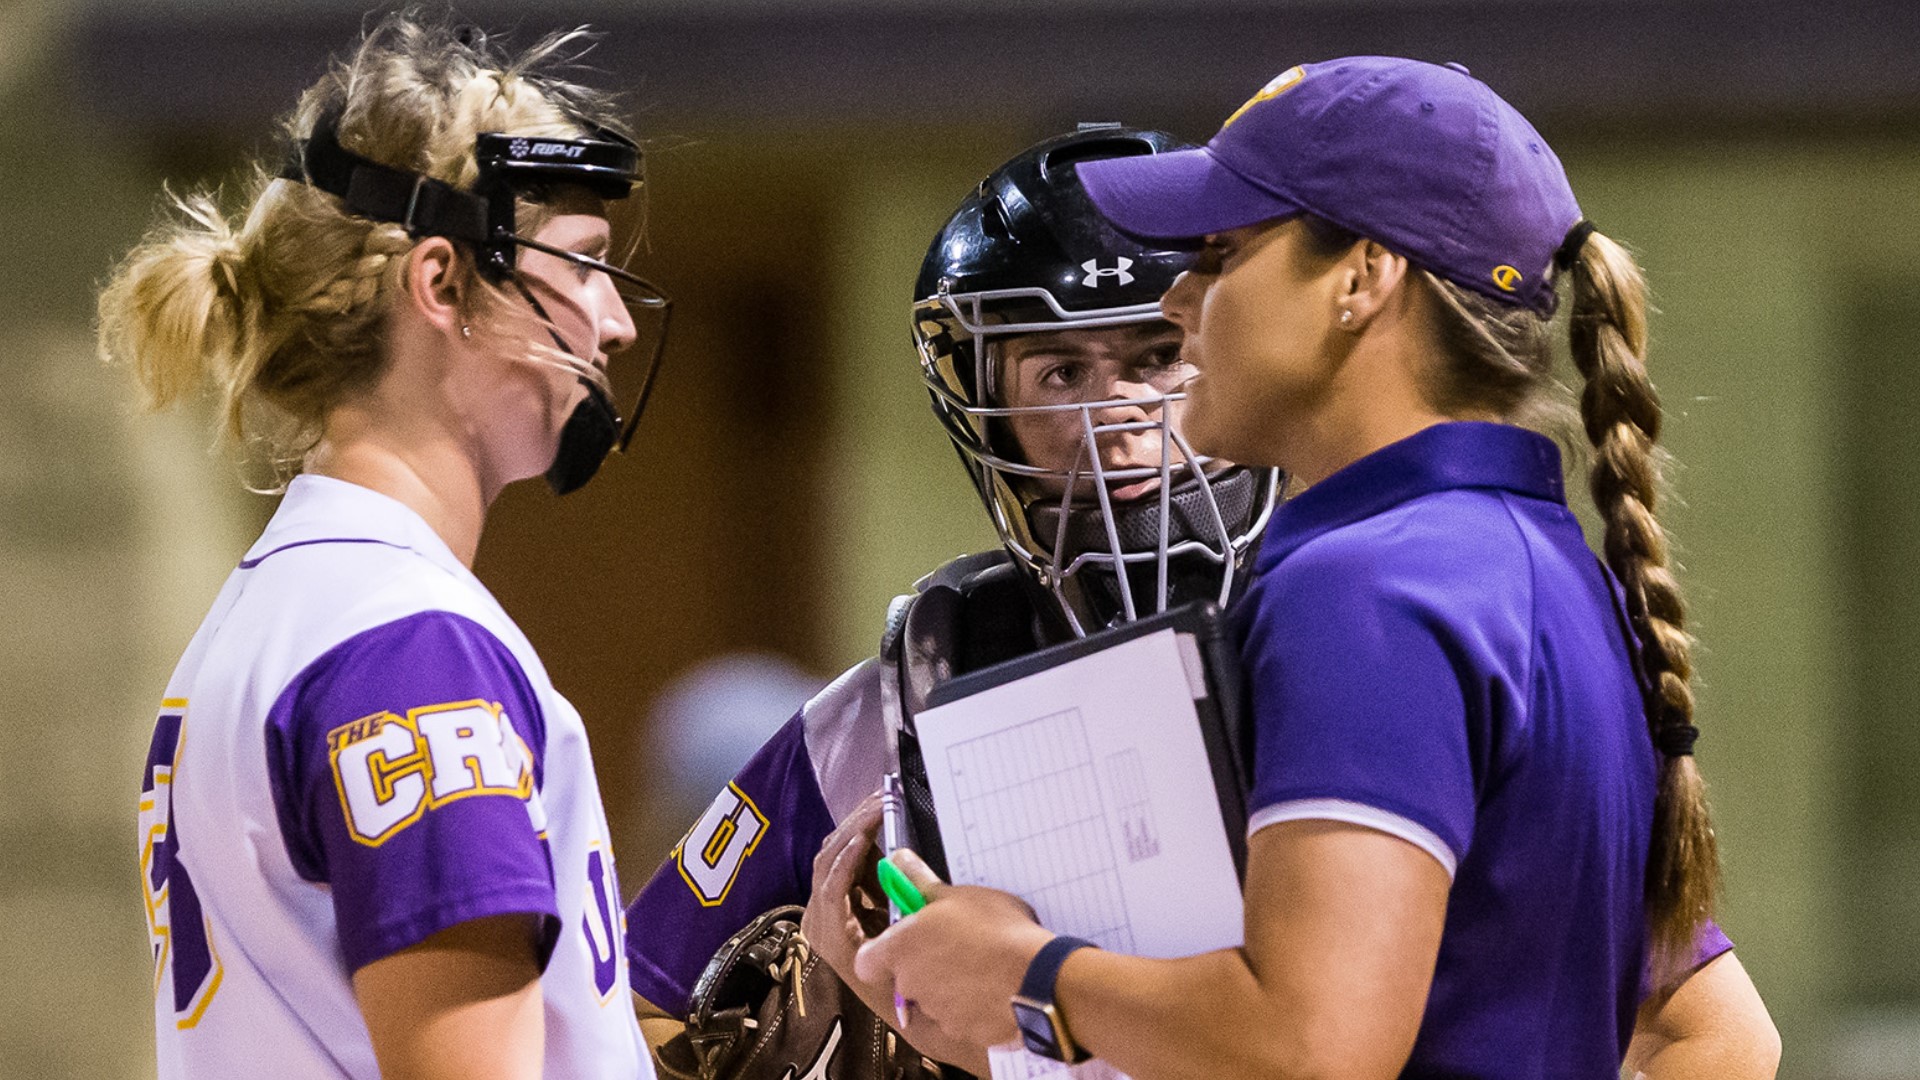 UMHB announced it had promoted assistant softball coach Melissa Mojica after Larry Hennig retired following 10 years as head coach of the Cru.